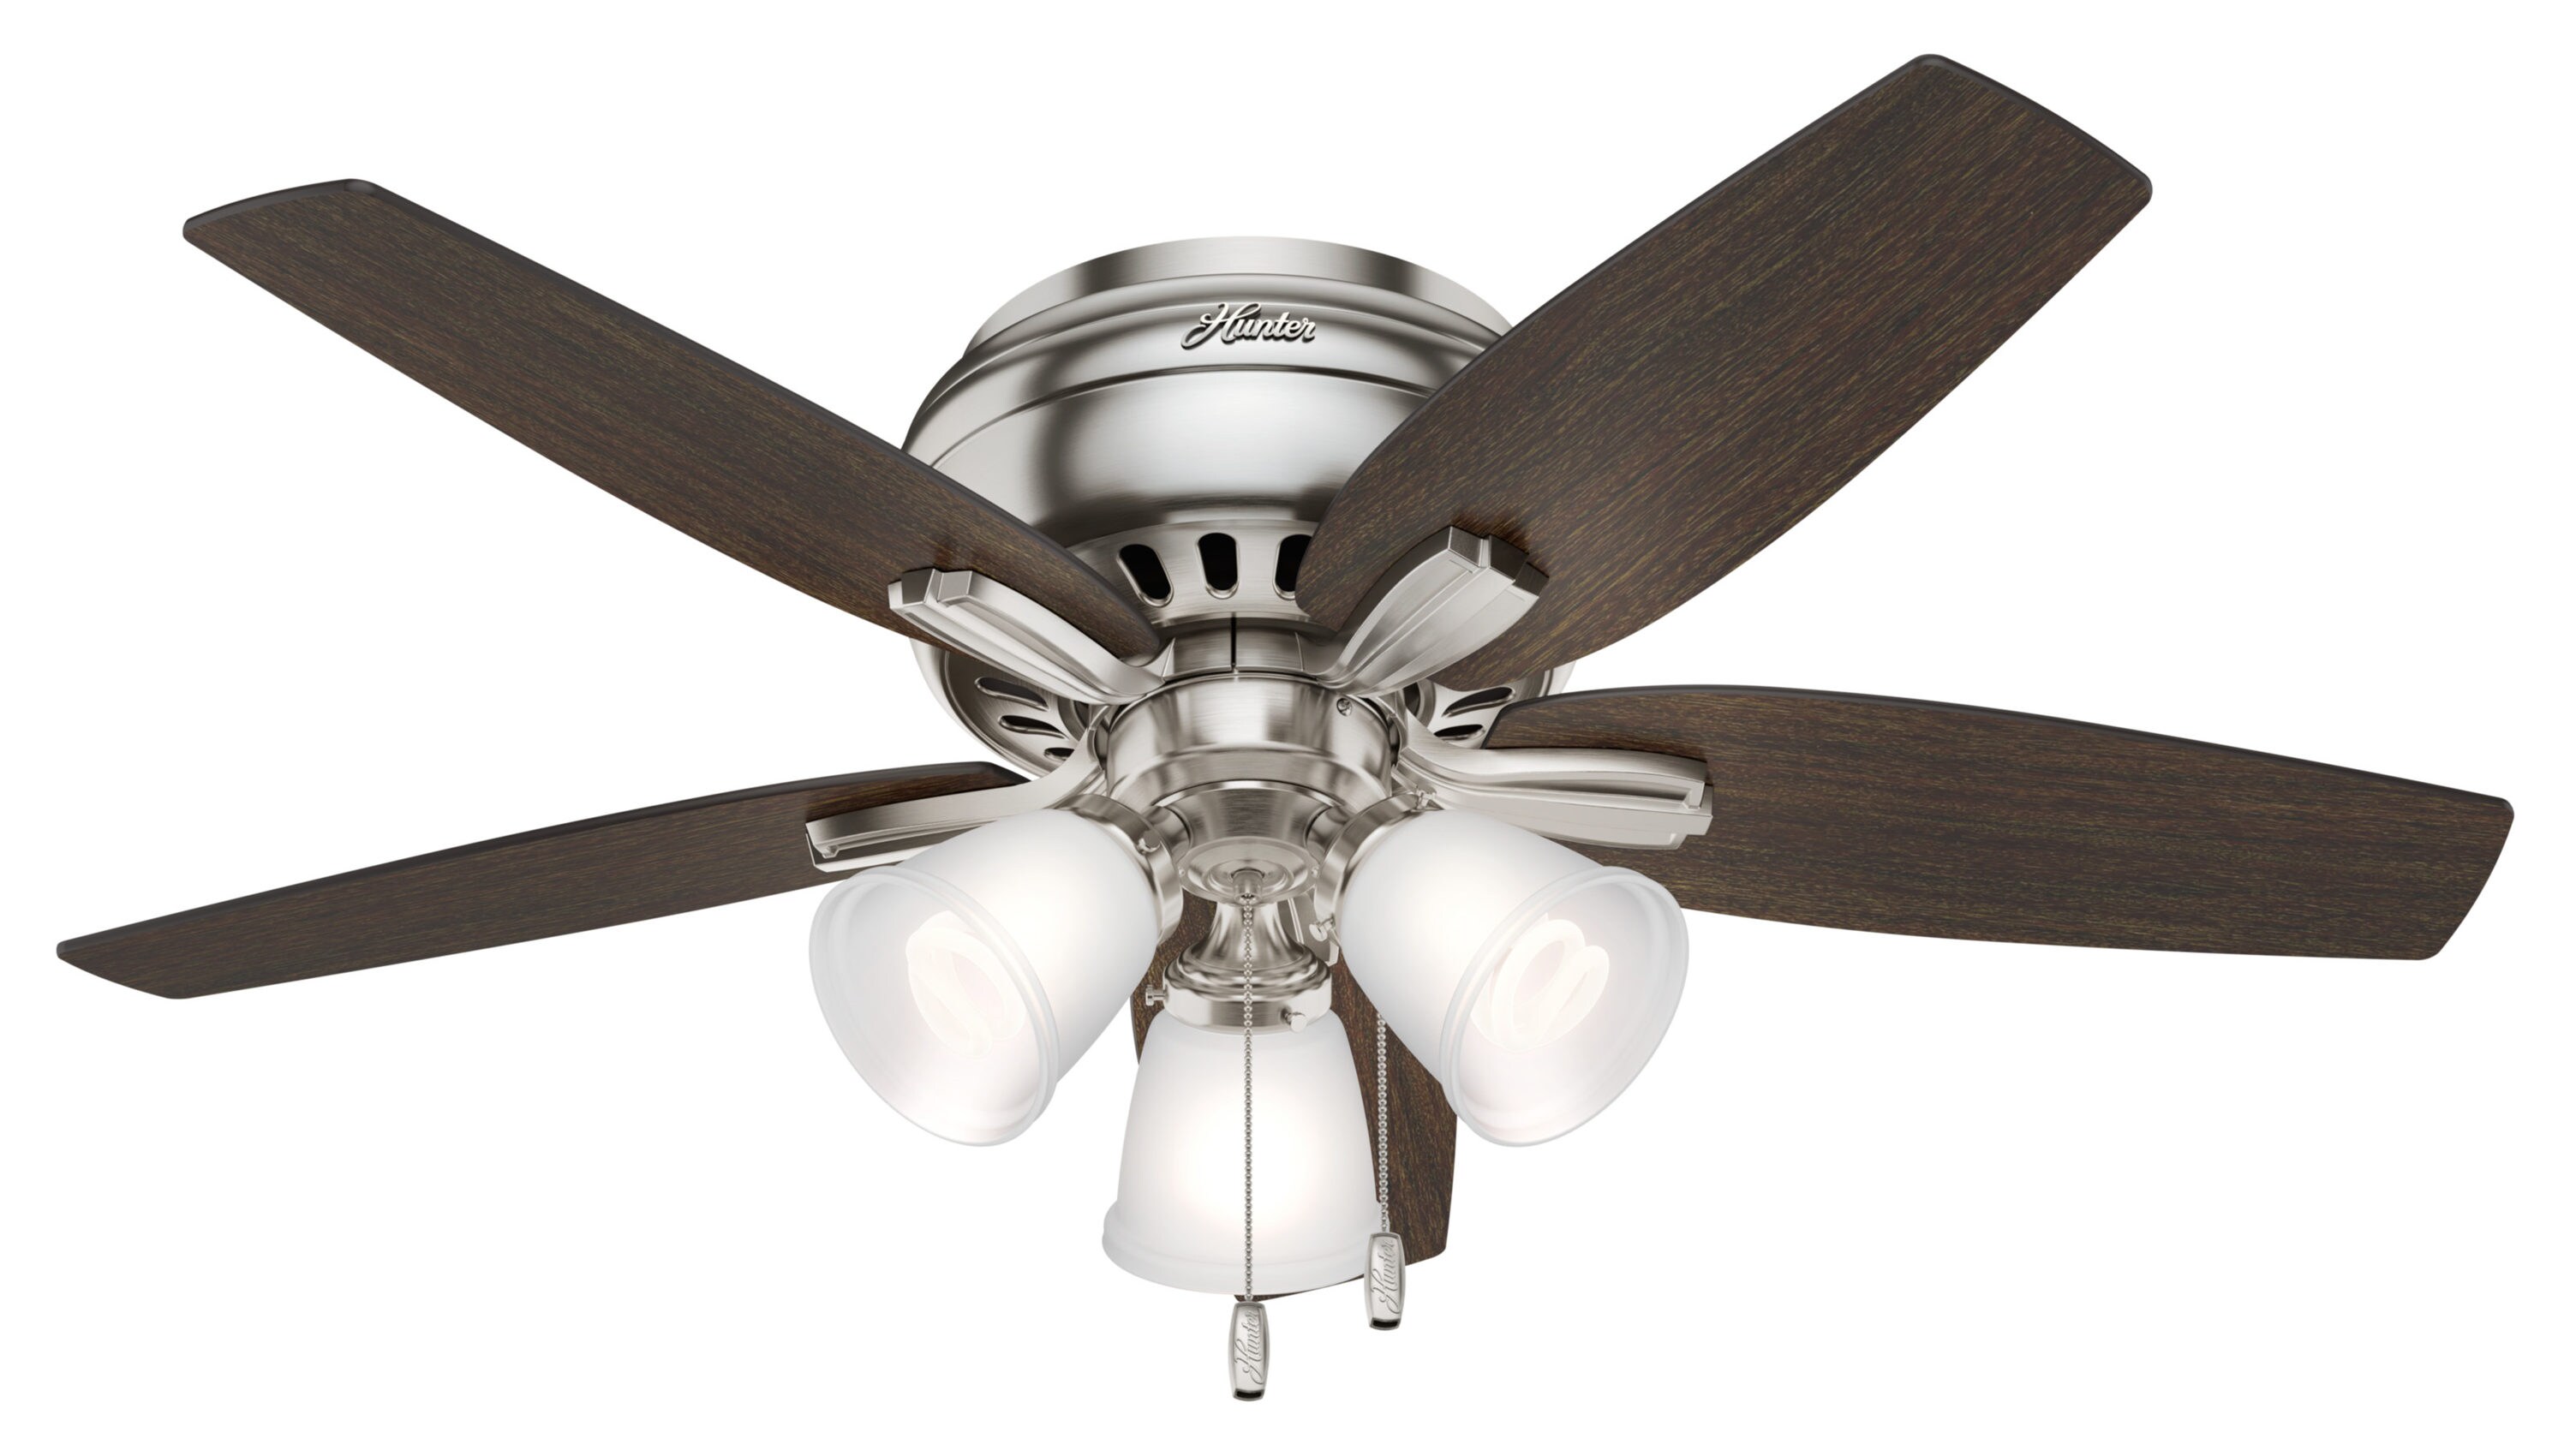 Oil Rubbed Bronze Satin Nickel or White 42 Inch Ceiling Fan with Light Kit 